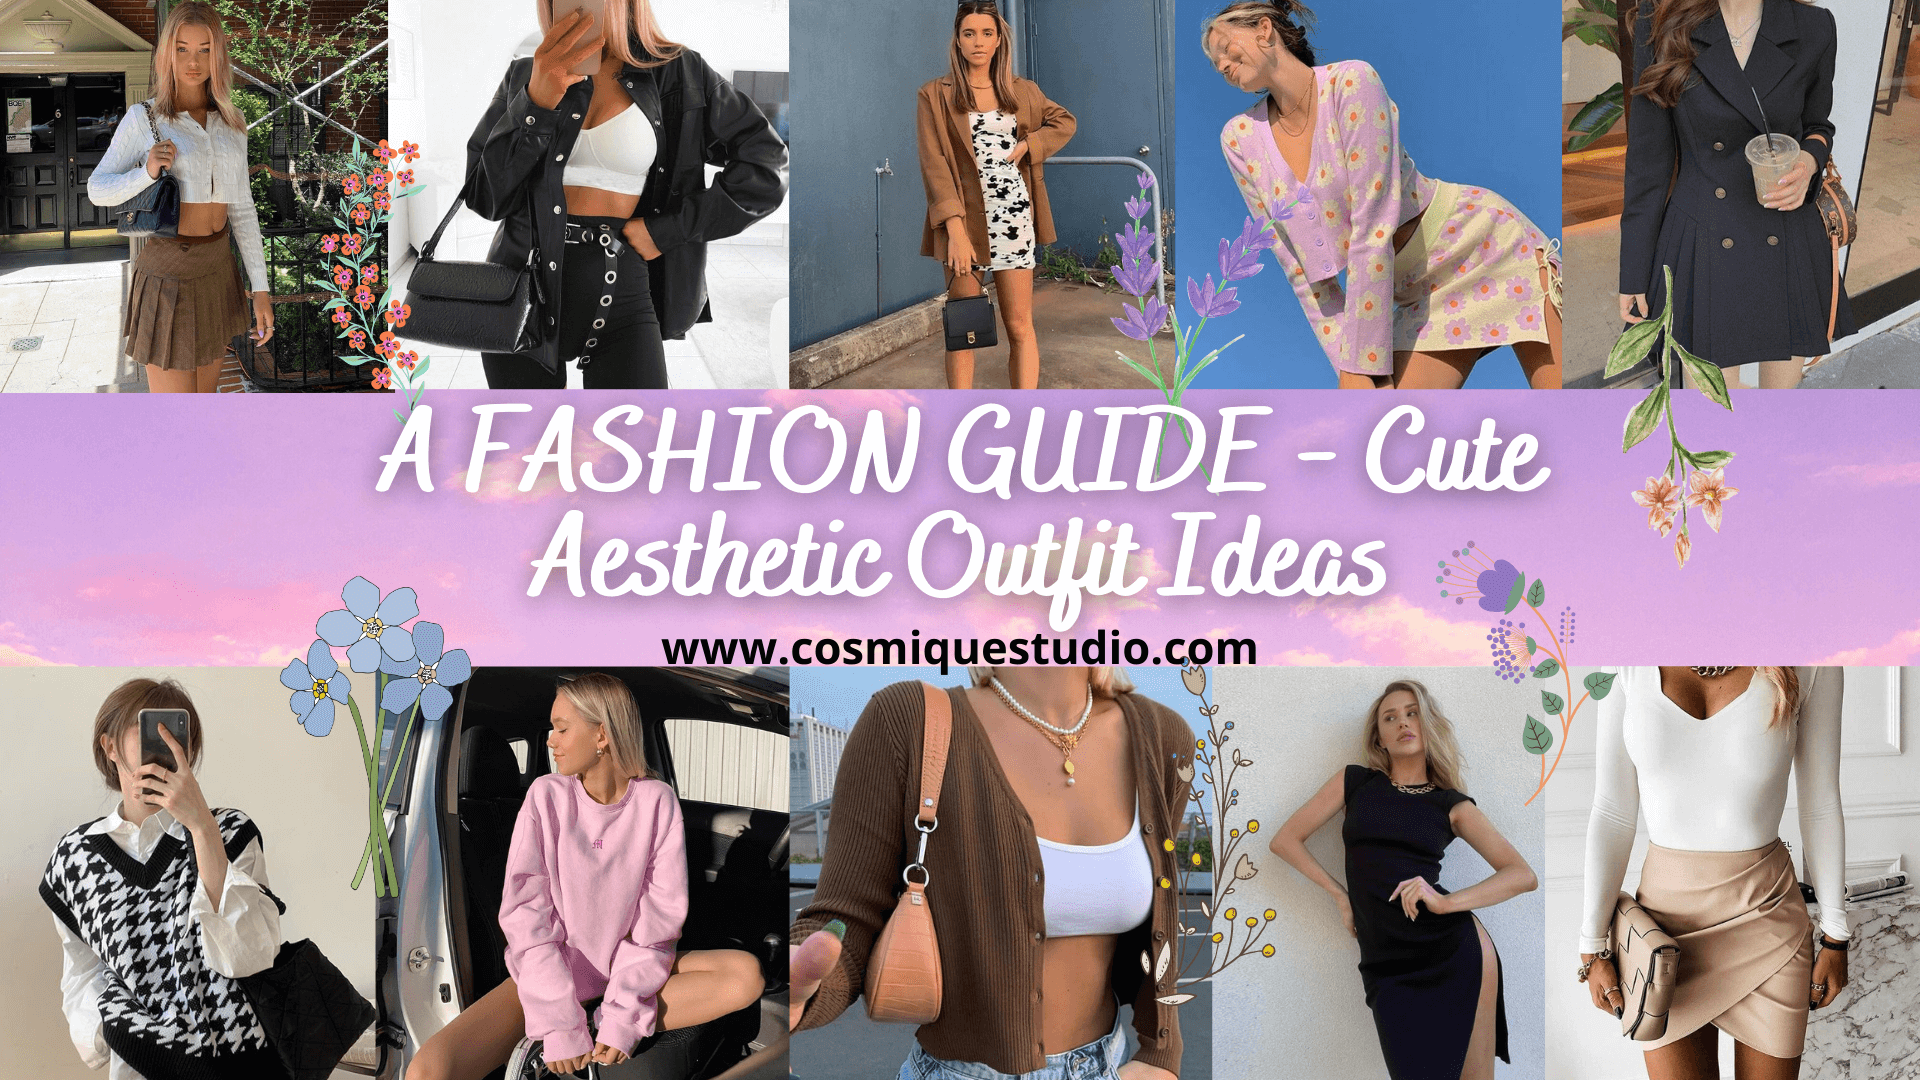 A FASHION GUIDE - Cute Aesthetic Outfit Ideas - Cosmique Studio